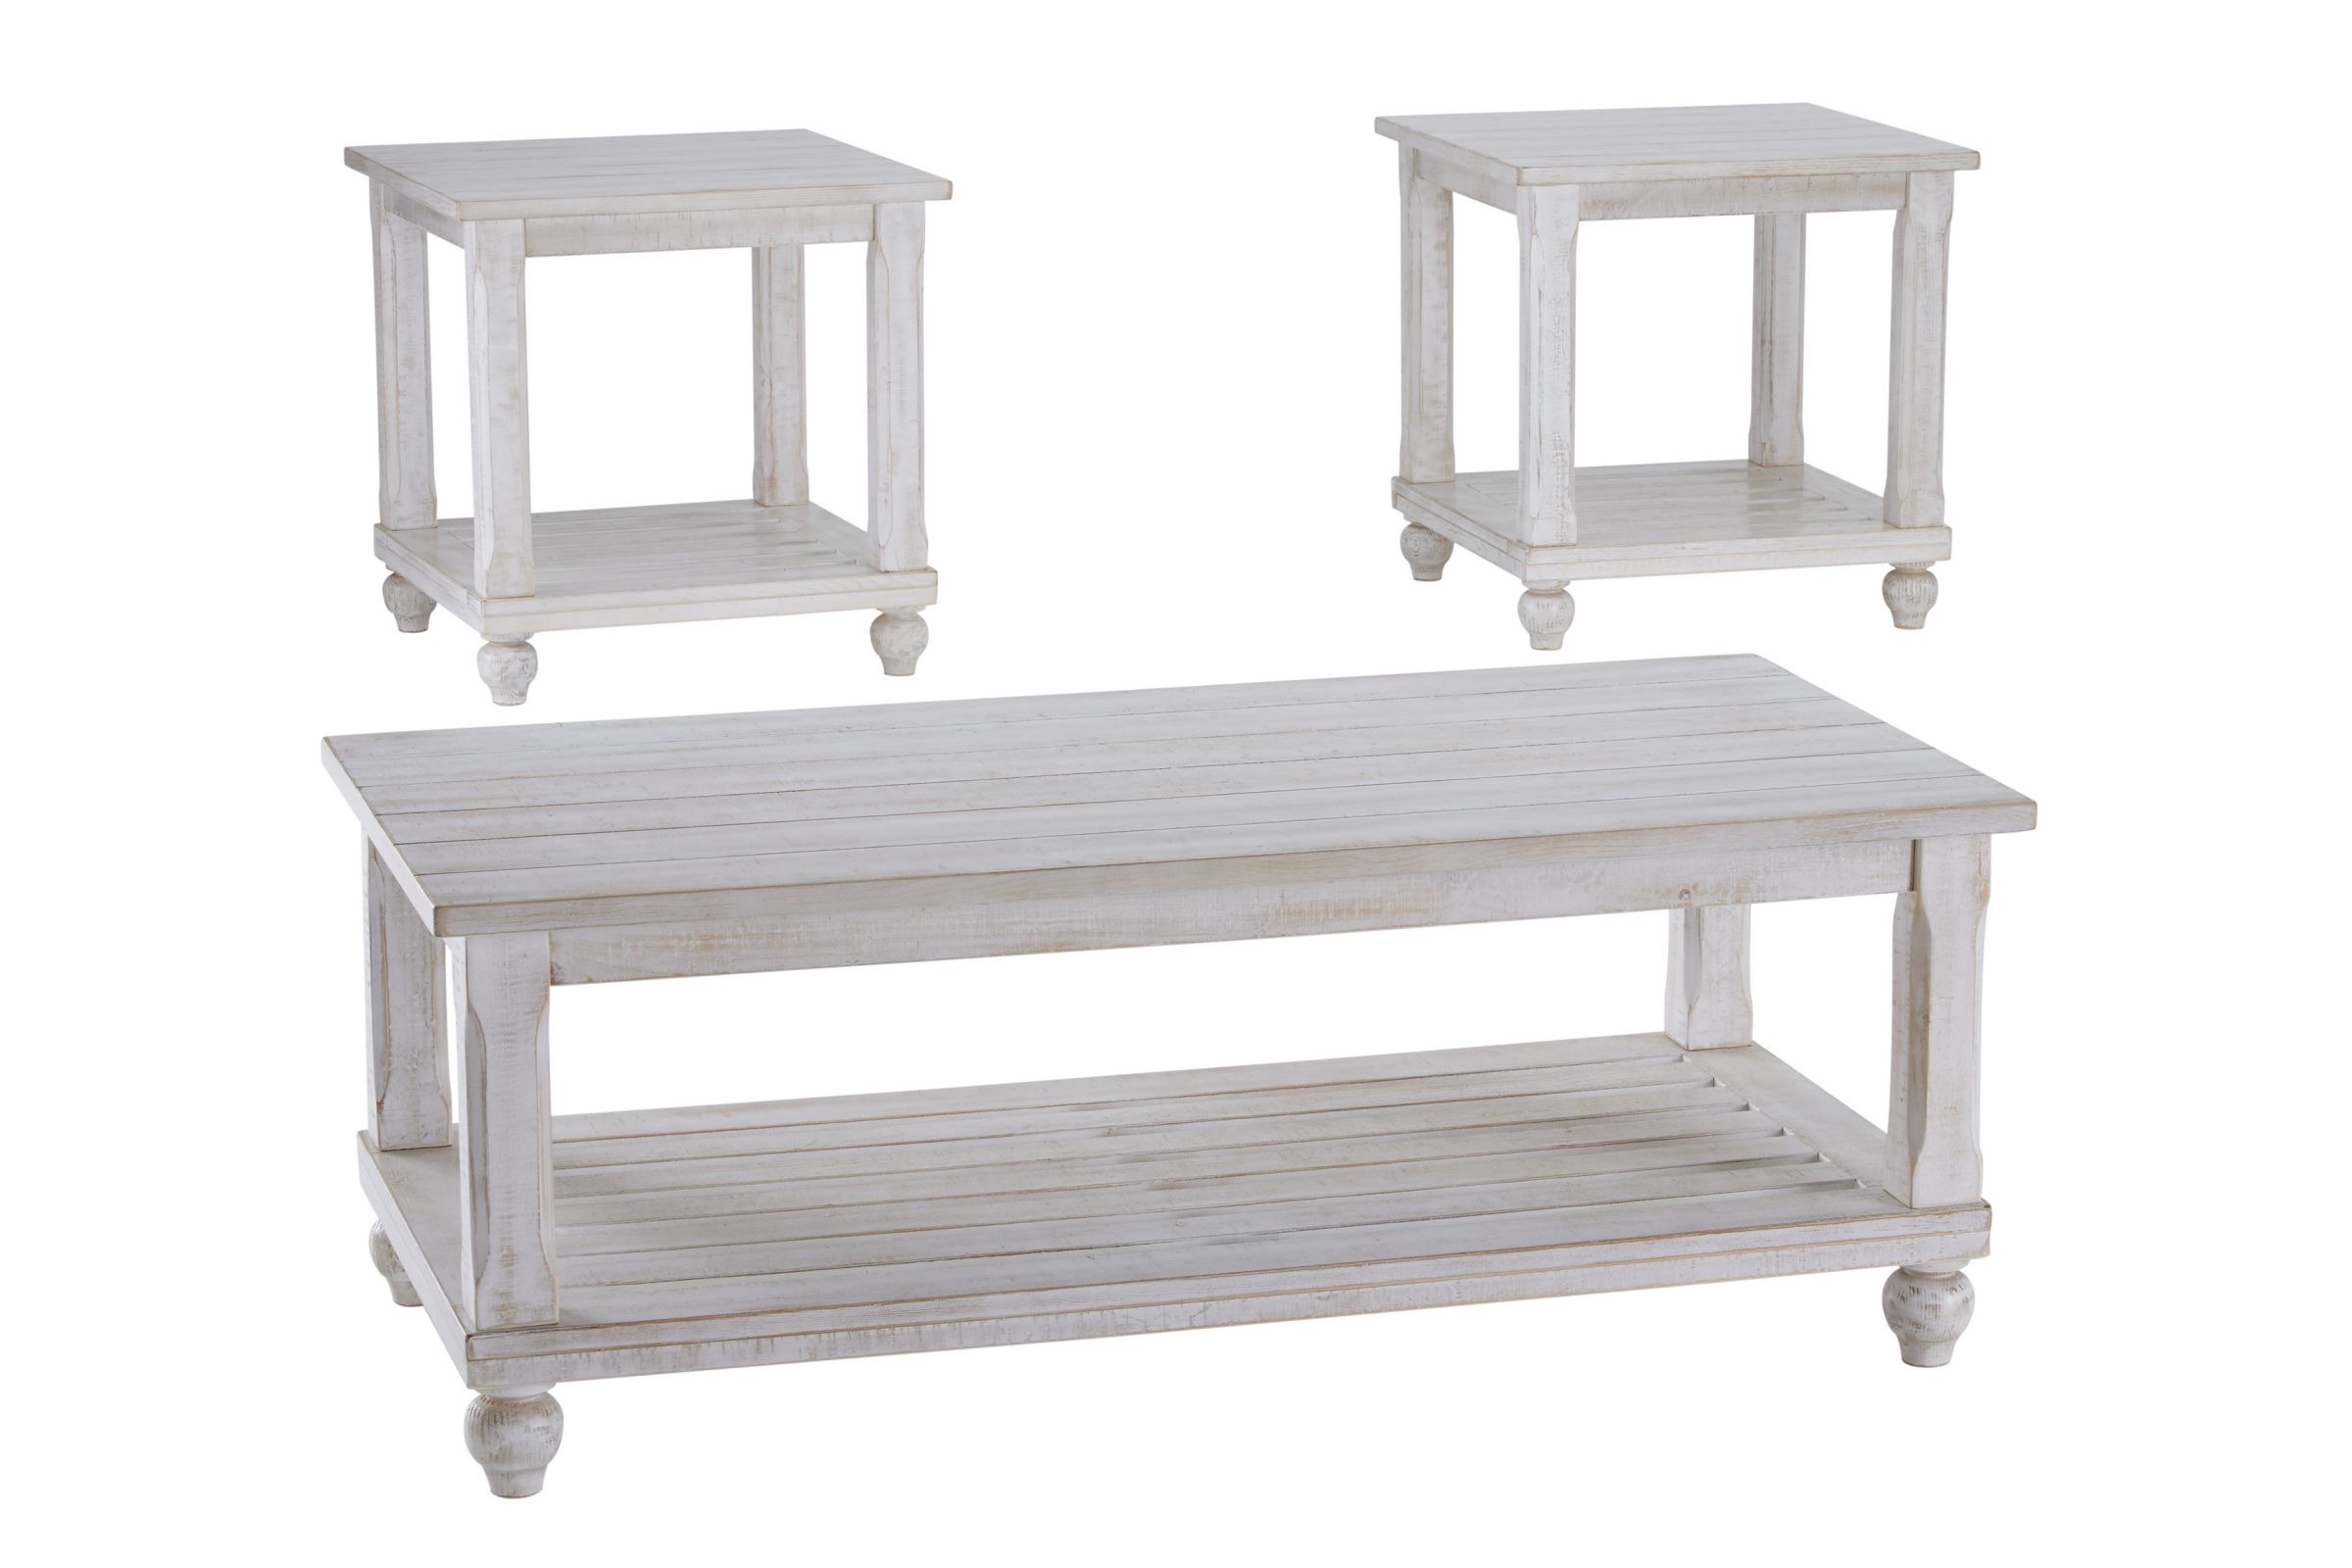 Cloudhurst Occasional Table Set of 3 by Ashley